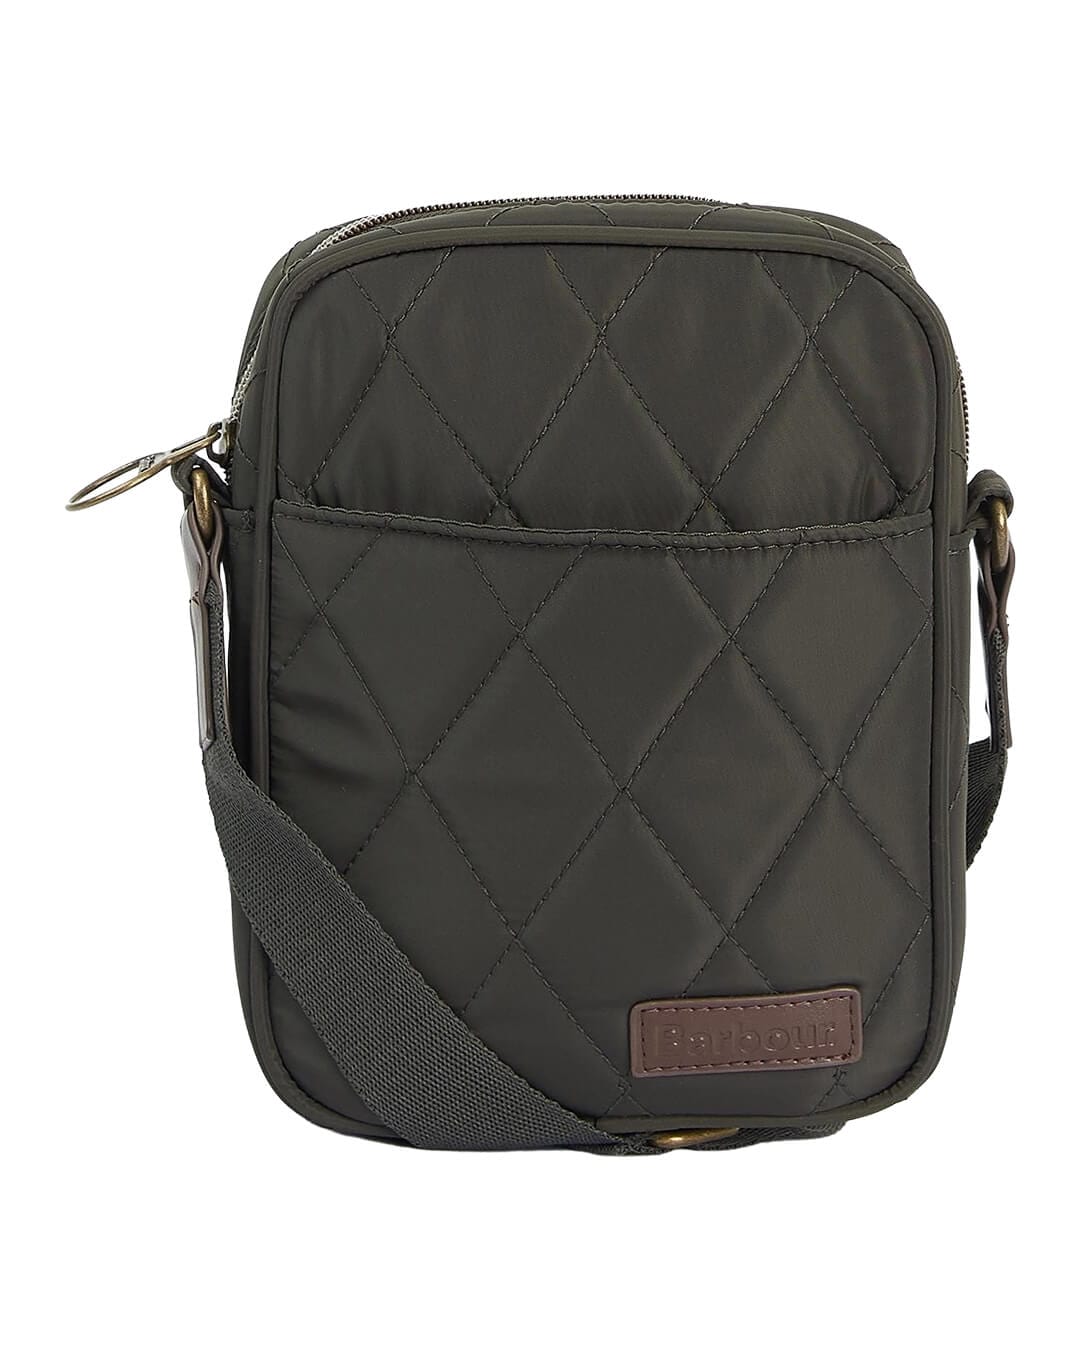 Barbour Bags ONE Barbour Quilted Green Cross Body